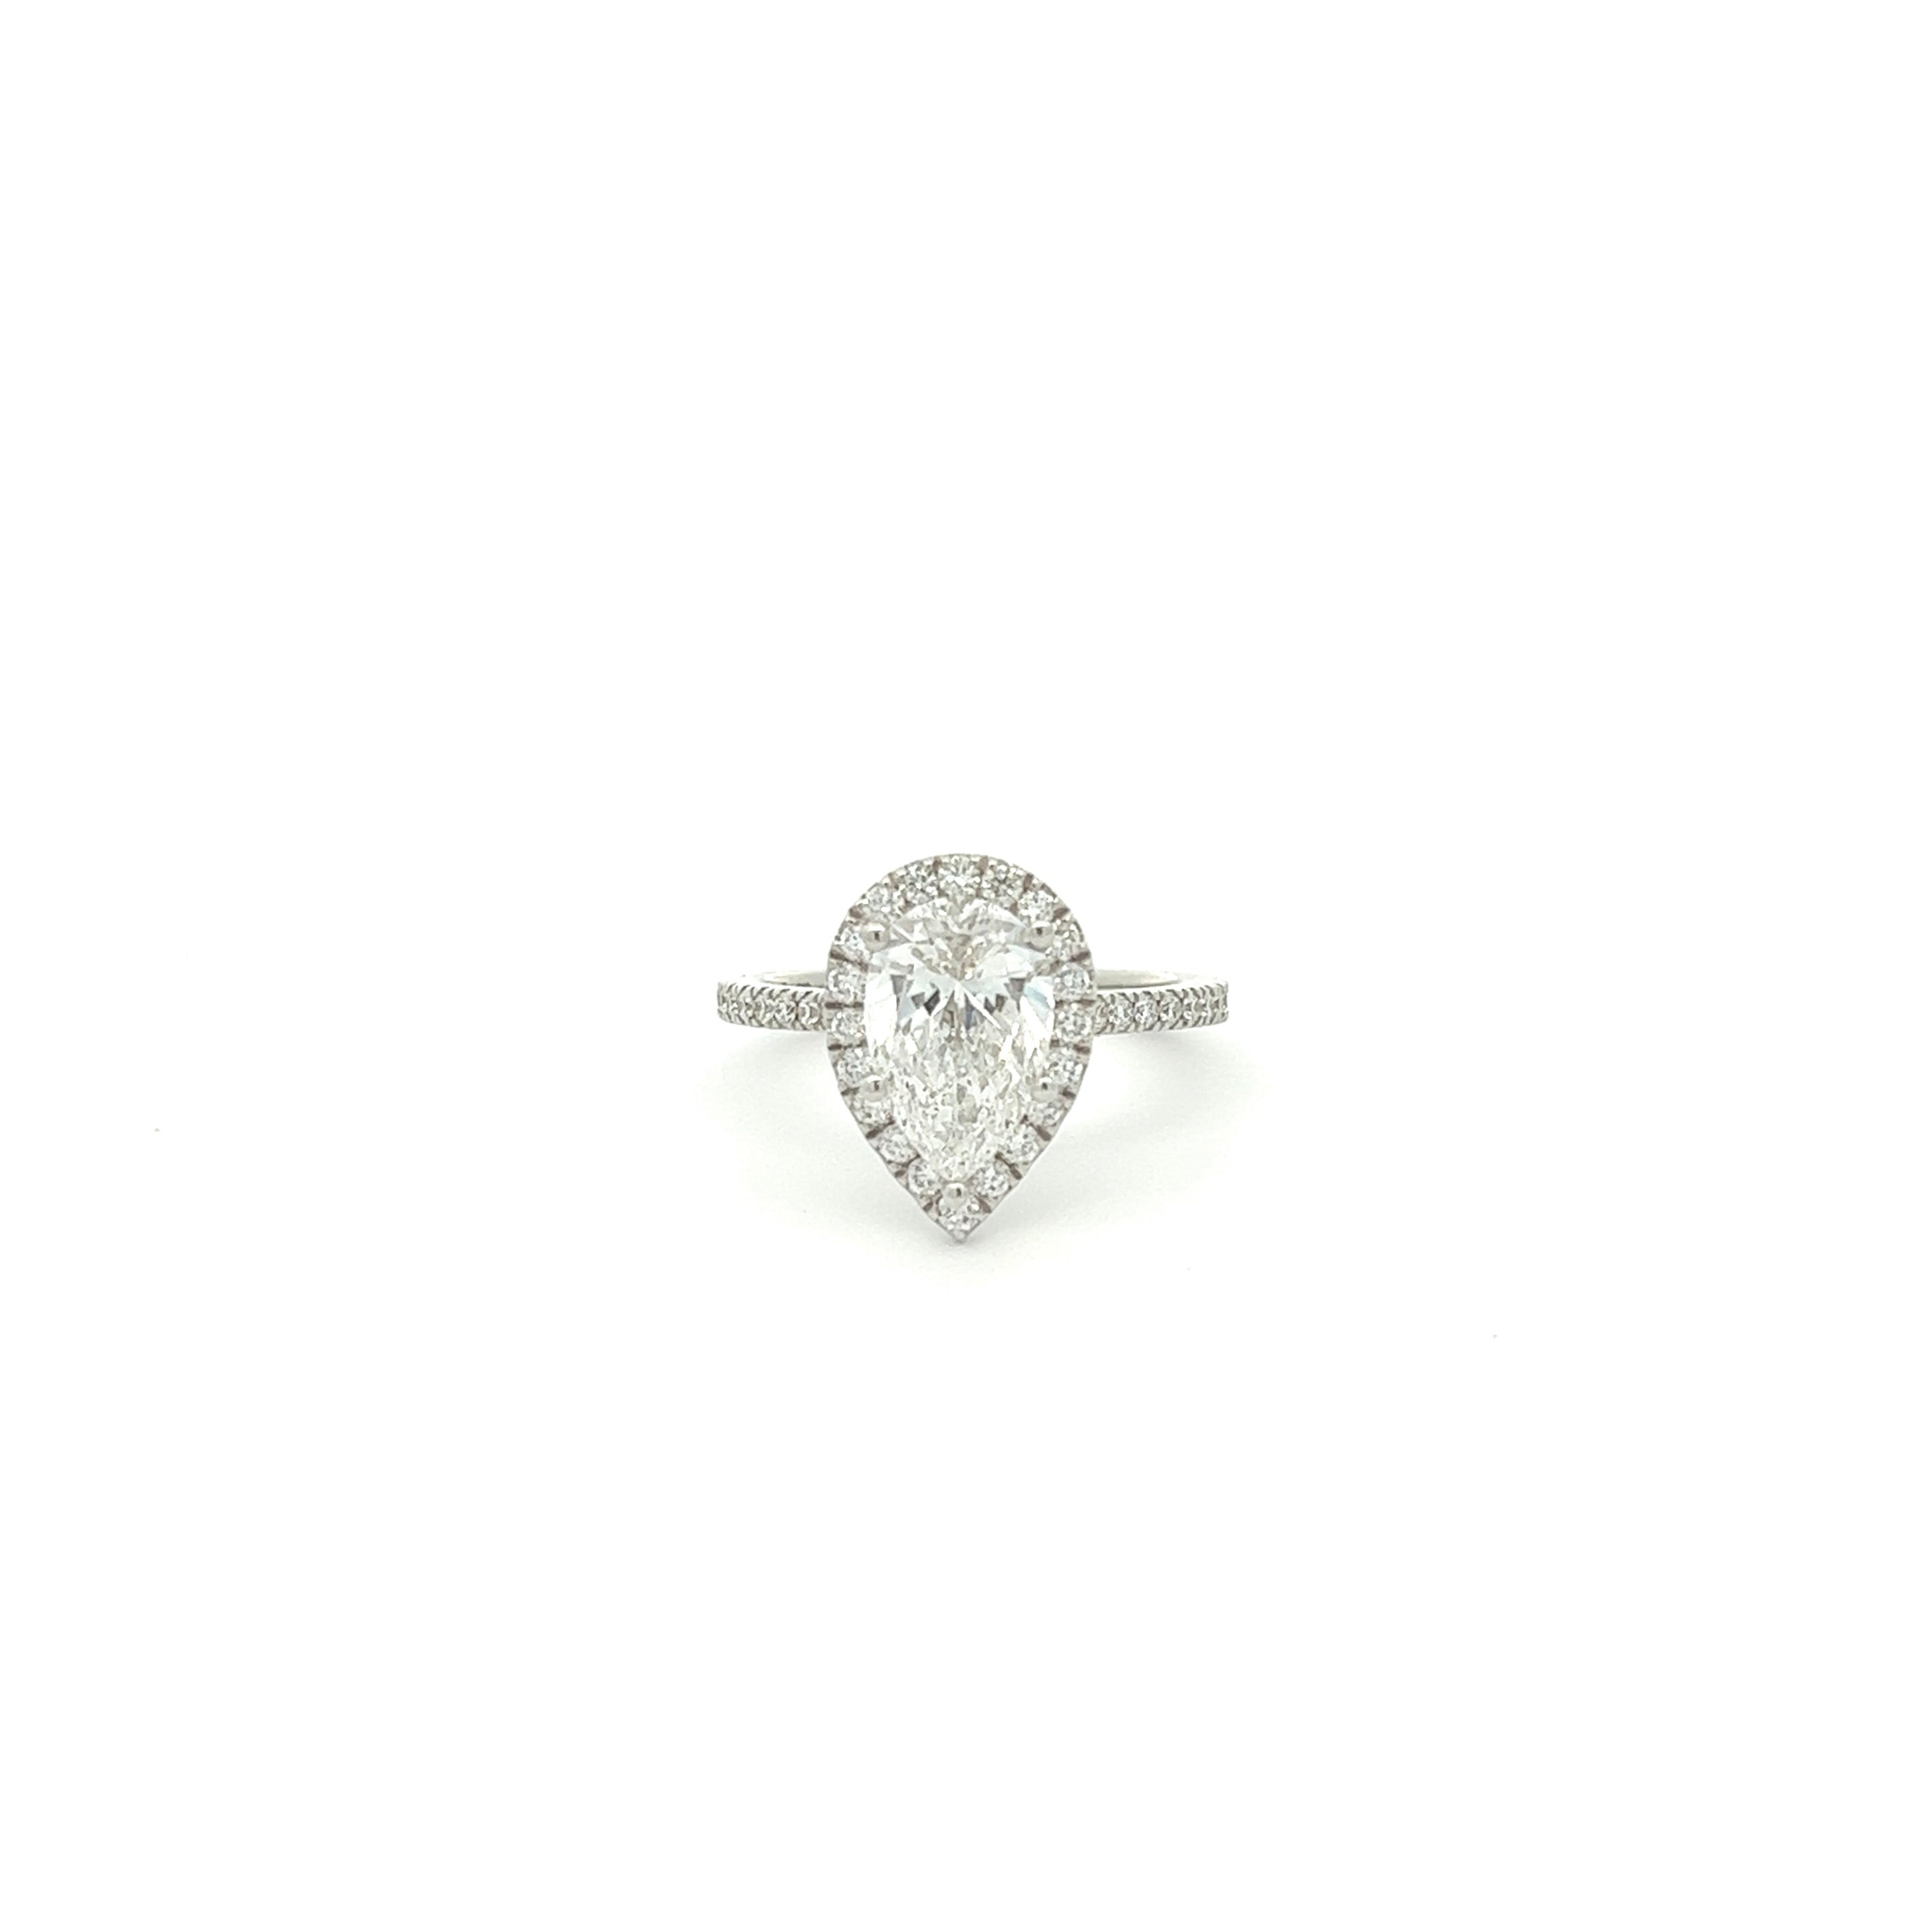 The Terry 18k White Gold Pear Shaped Engagement Ring